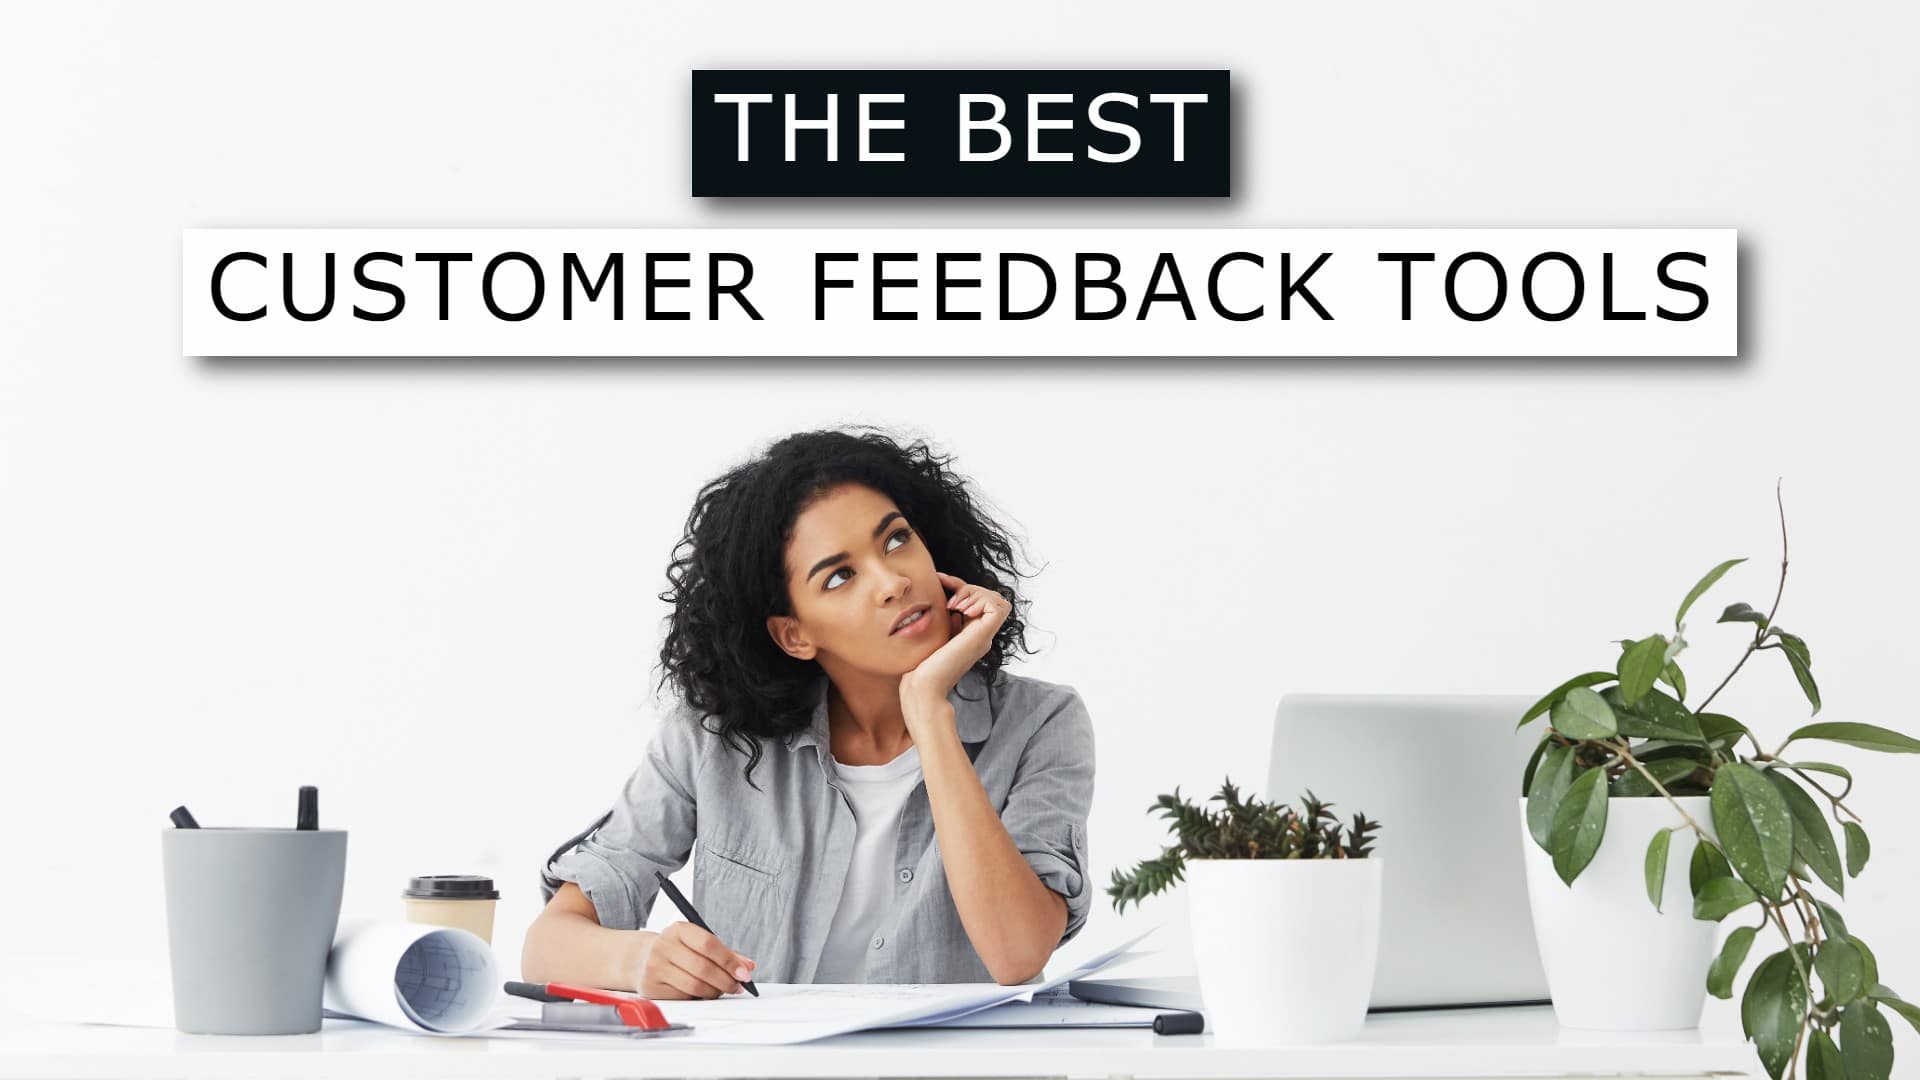 The 28 Best Customer Feedback Tools You’ll Want to Try | 2023 Updated List